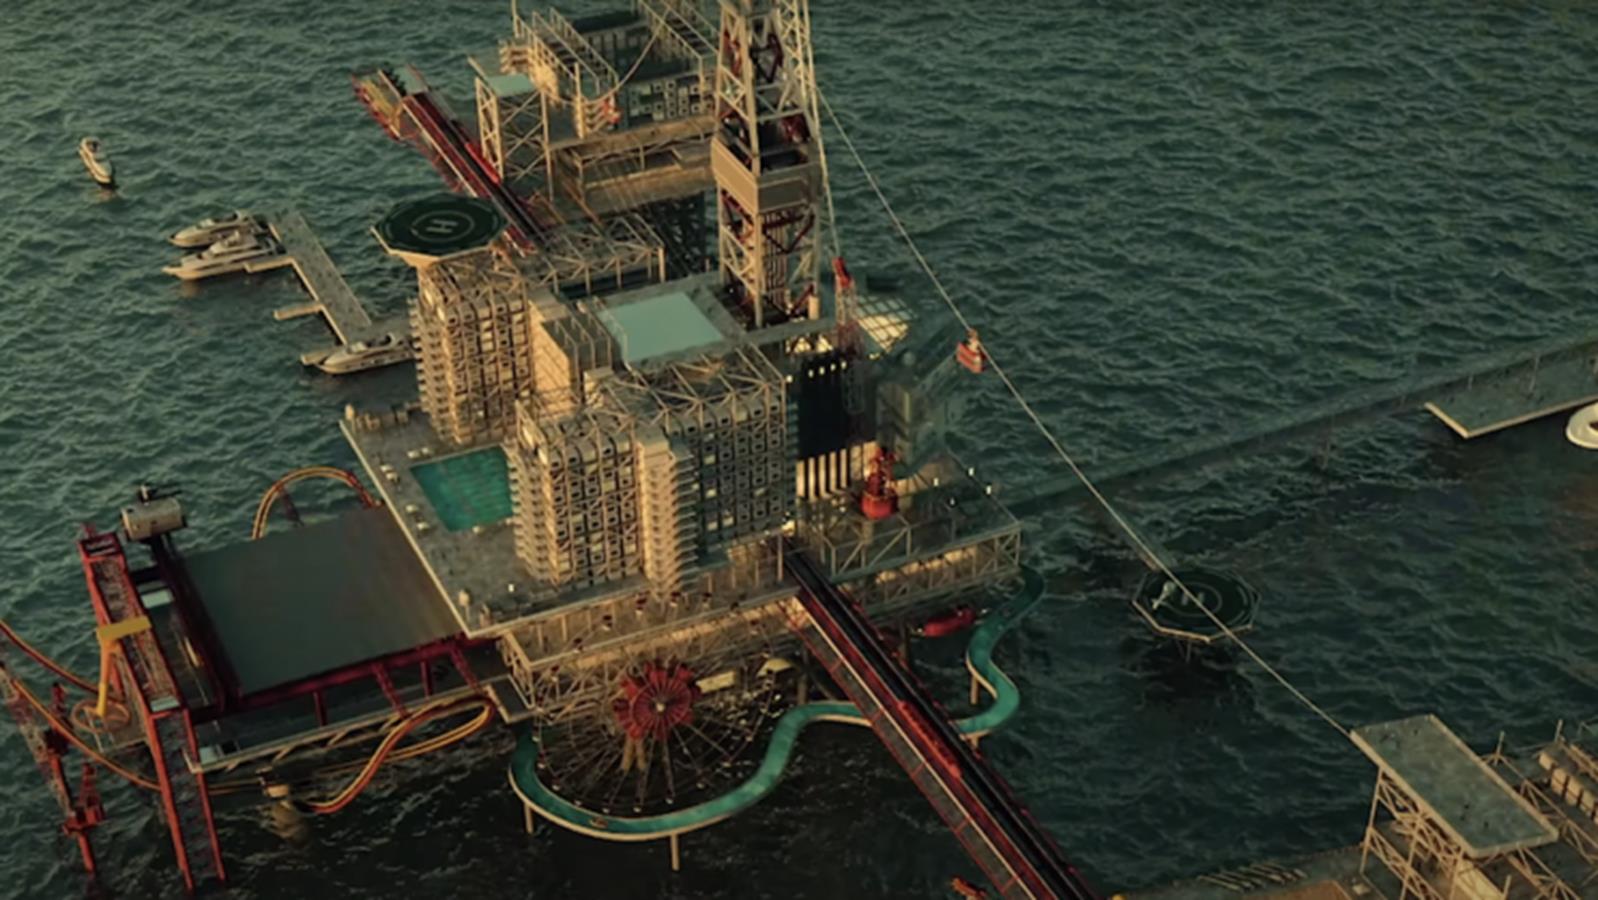 Maybe a vacation on the oil rig?  THE RIG of Saudi Arabia will offer exactly that